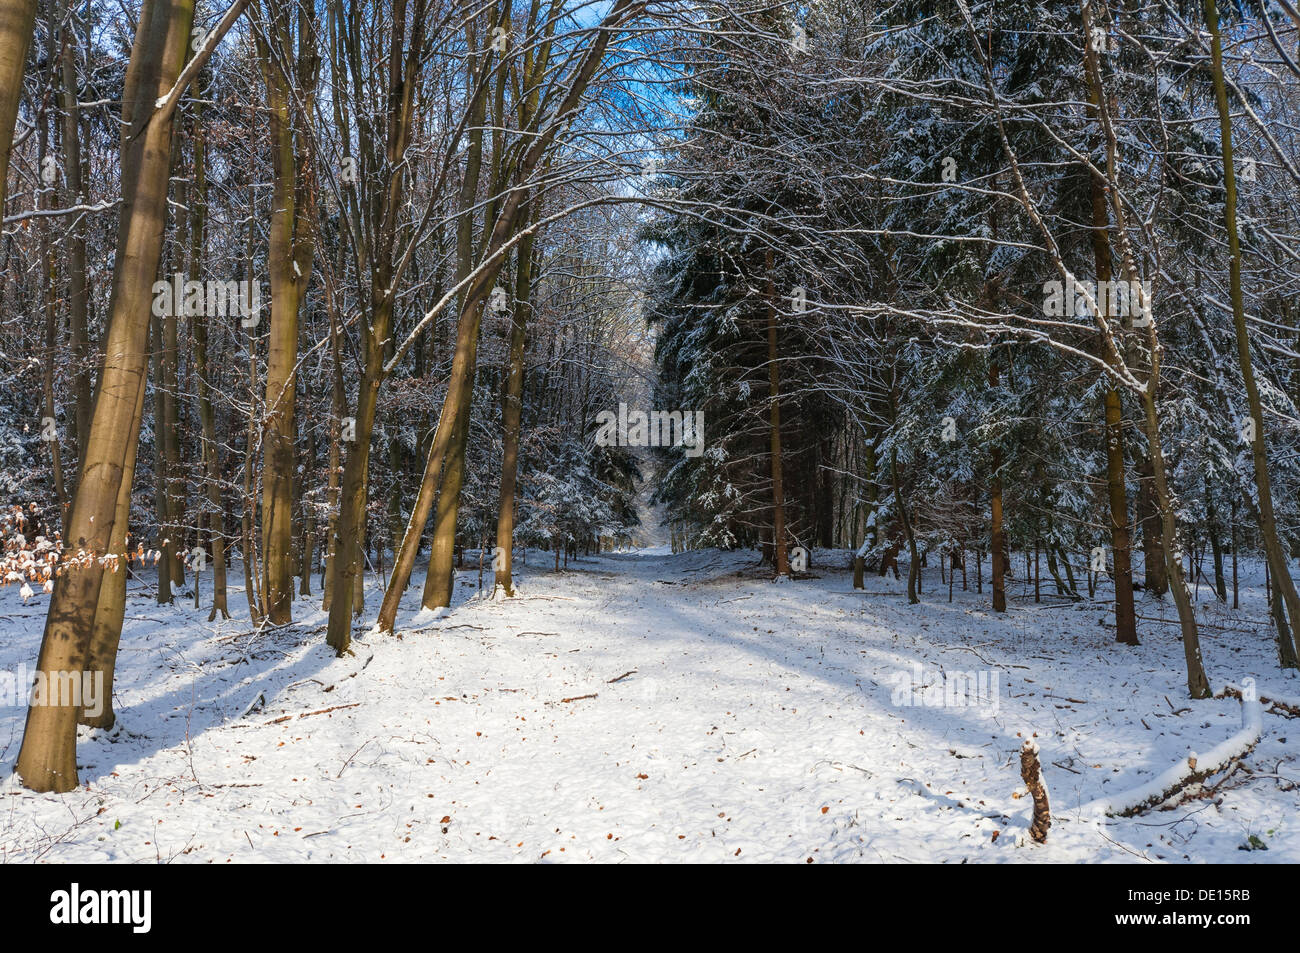 Snow-covered woodland path, Moenchbruch nature reserve, Mönchbruch Nature Reserve, Mörfelden, Hesse, Germany Stock Photo